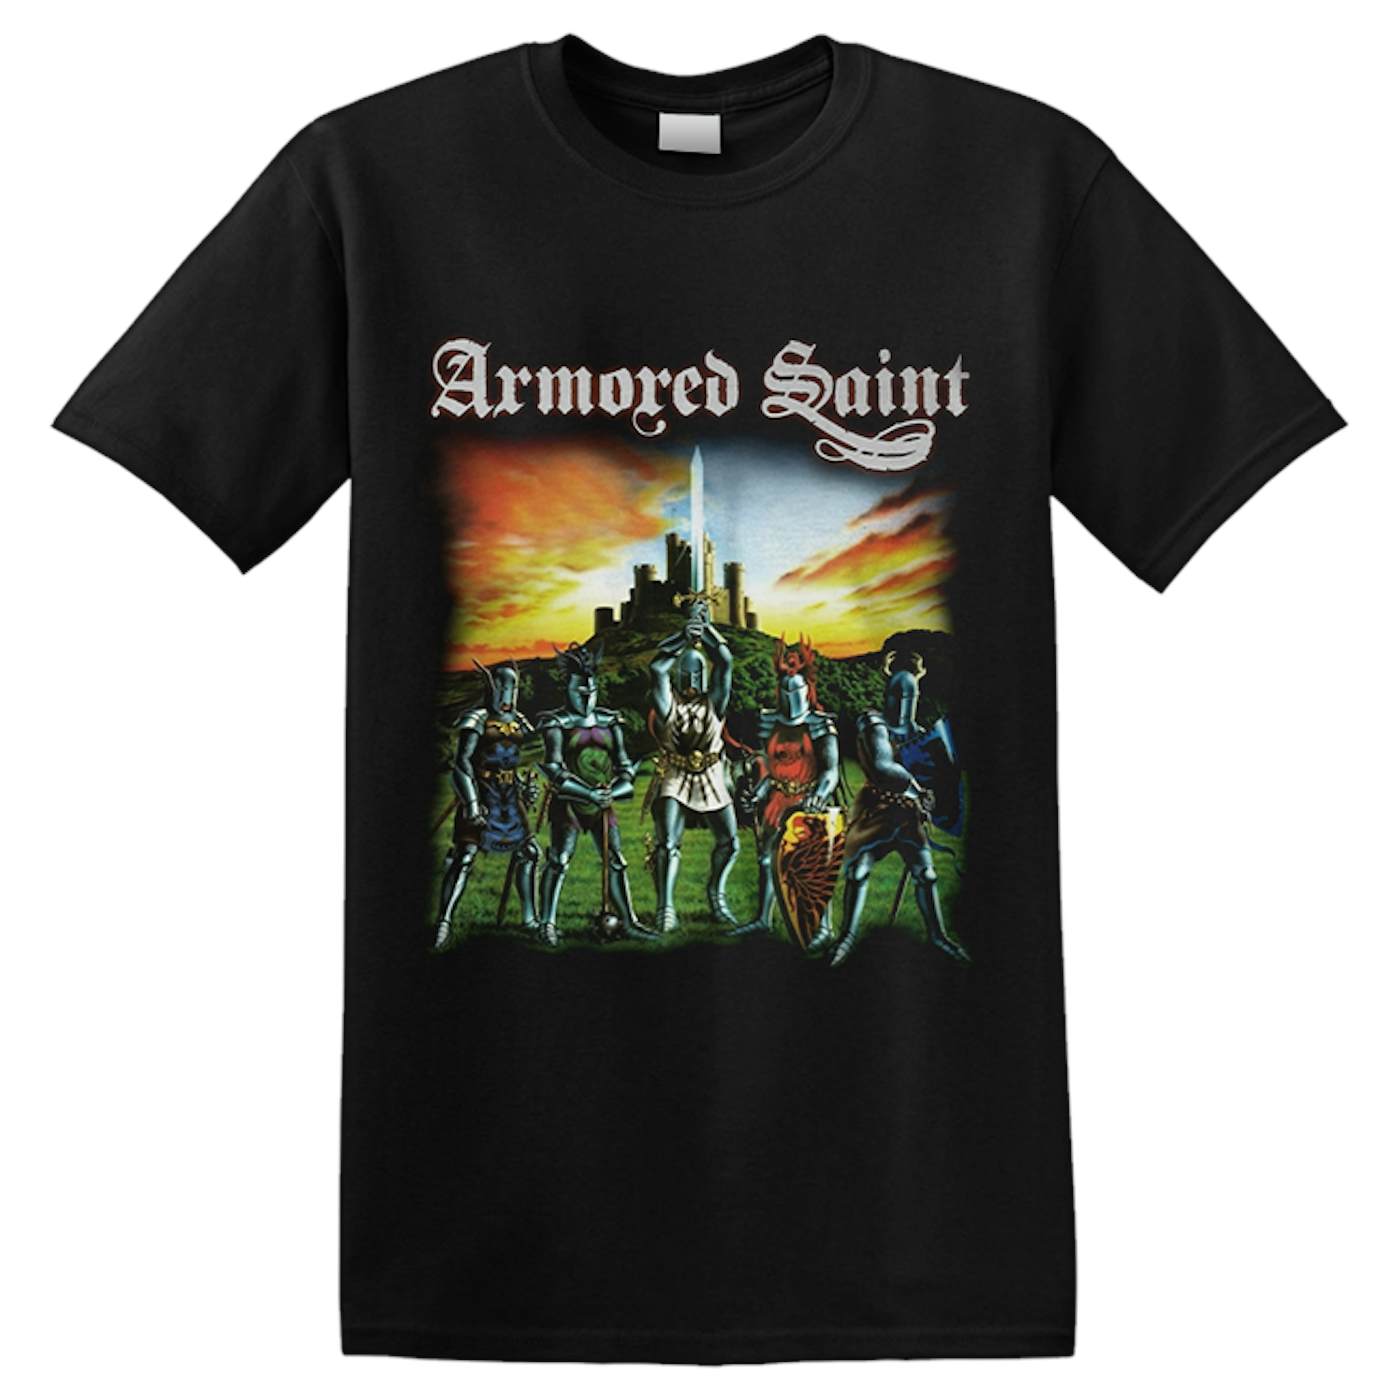 ARMORED SAINT - 'March Of The Saint' T-Shirt